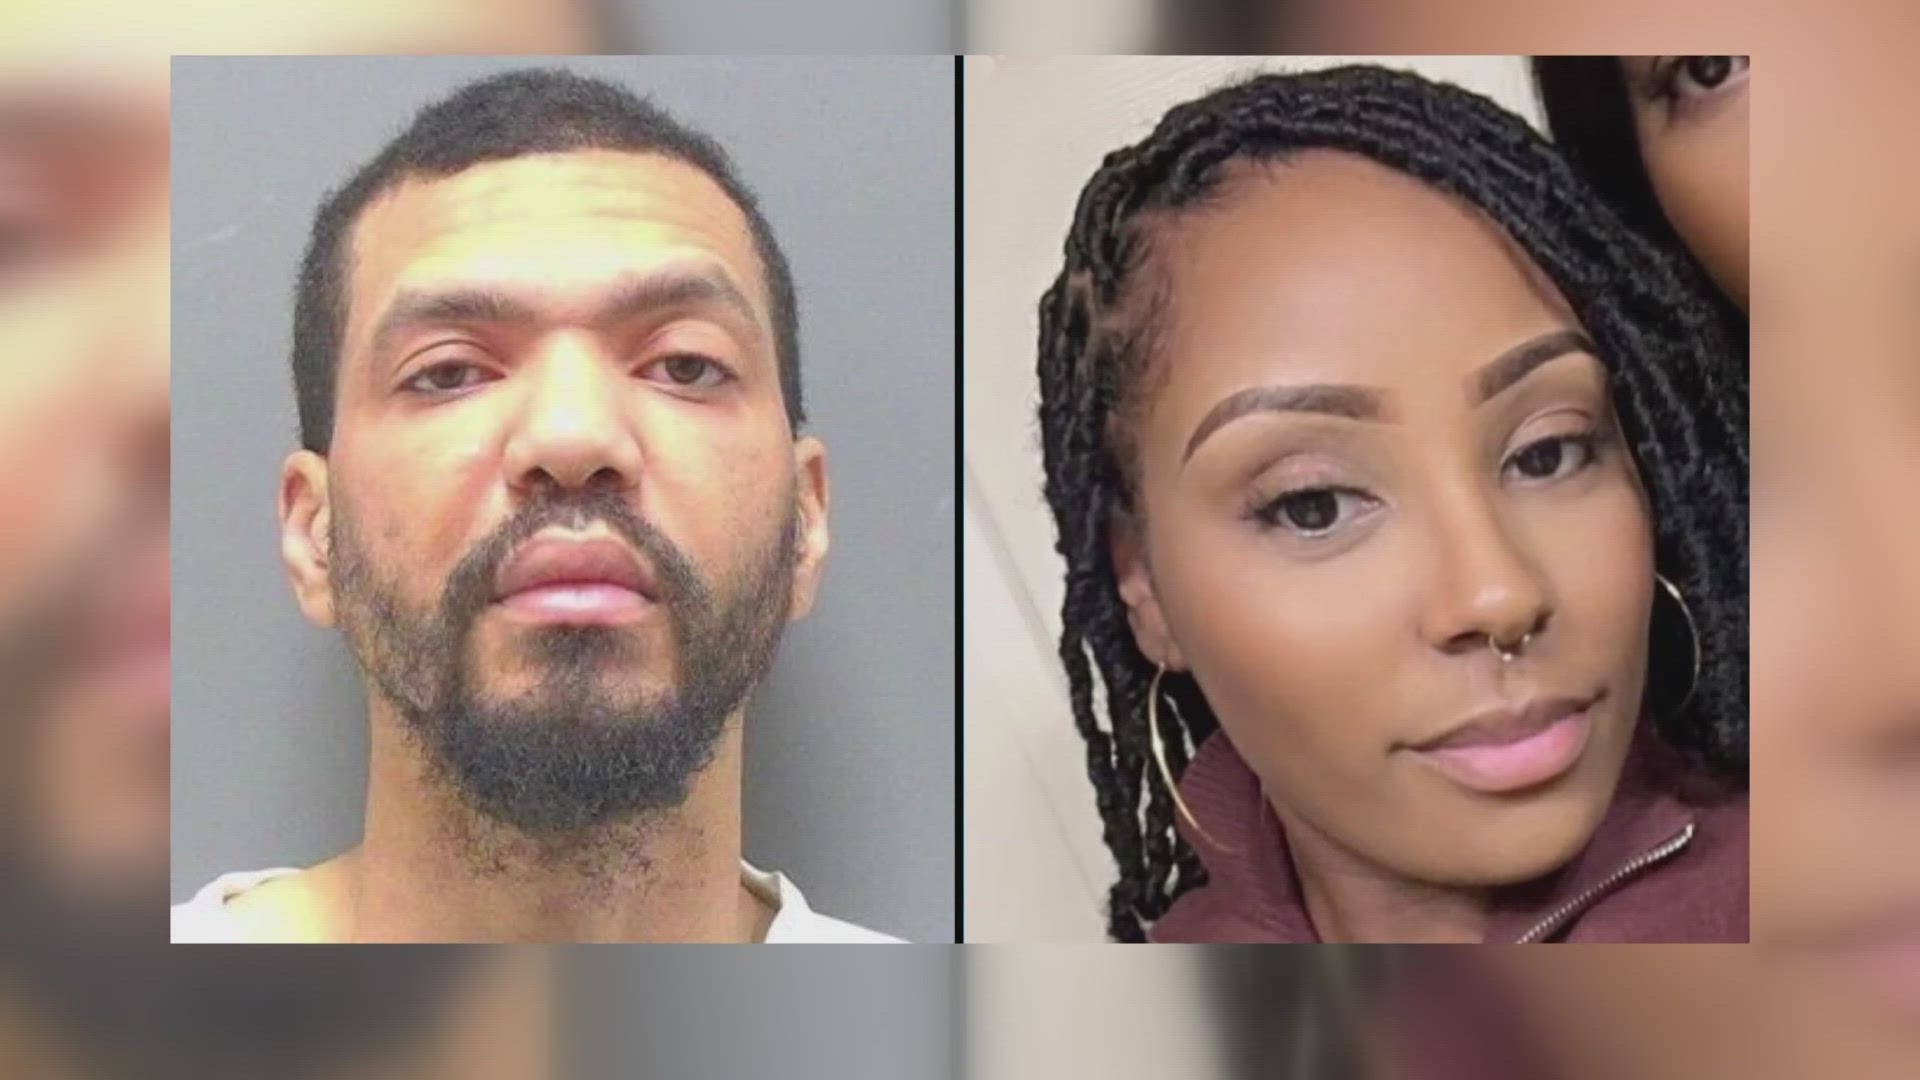 Marquisha Williams was last seen a week ago in north St. Louis with a man named Trenton Ivy. Officers found and arrested Ivy in Racine County, Wisconsin Friday.